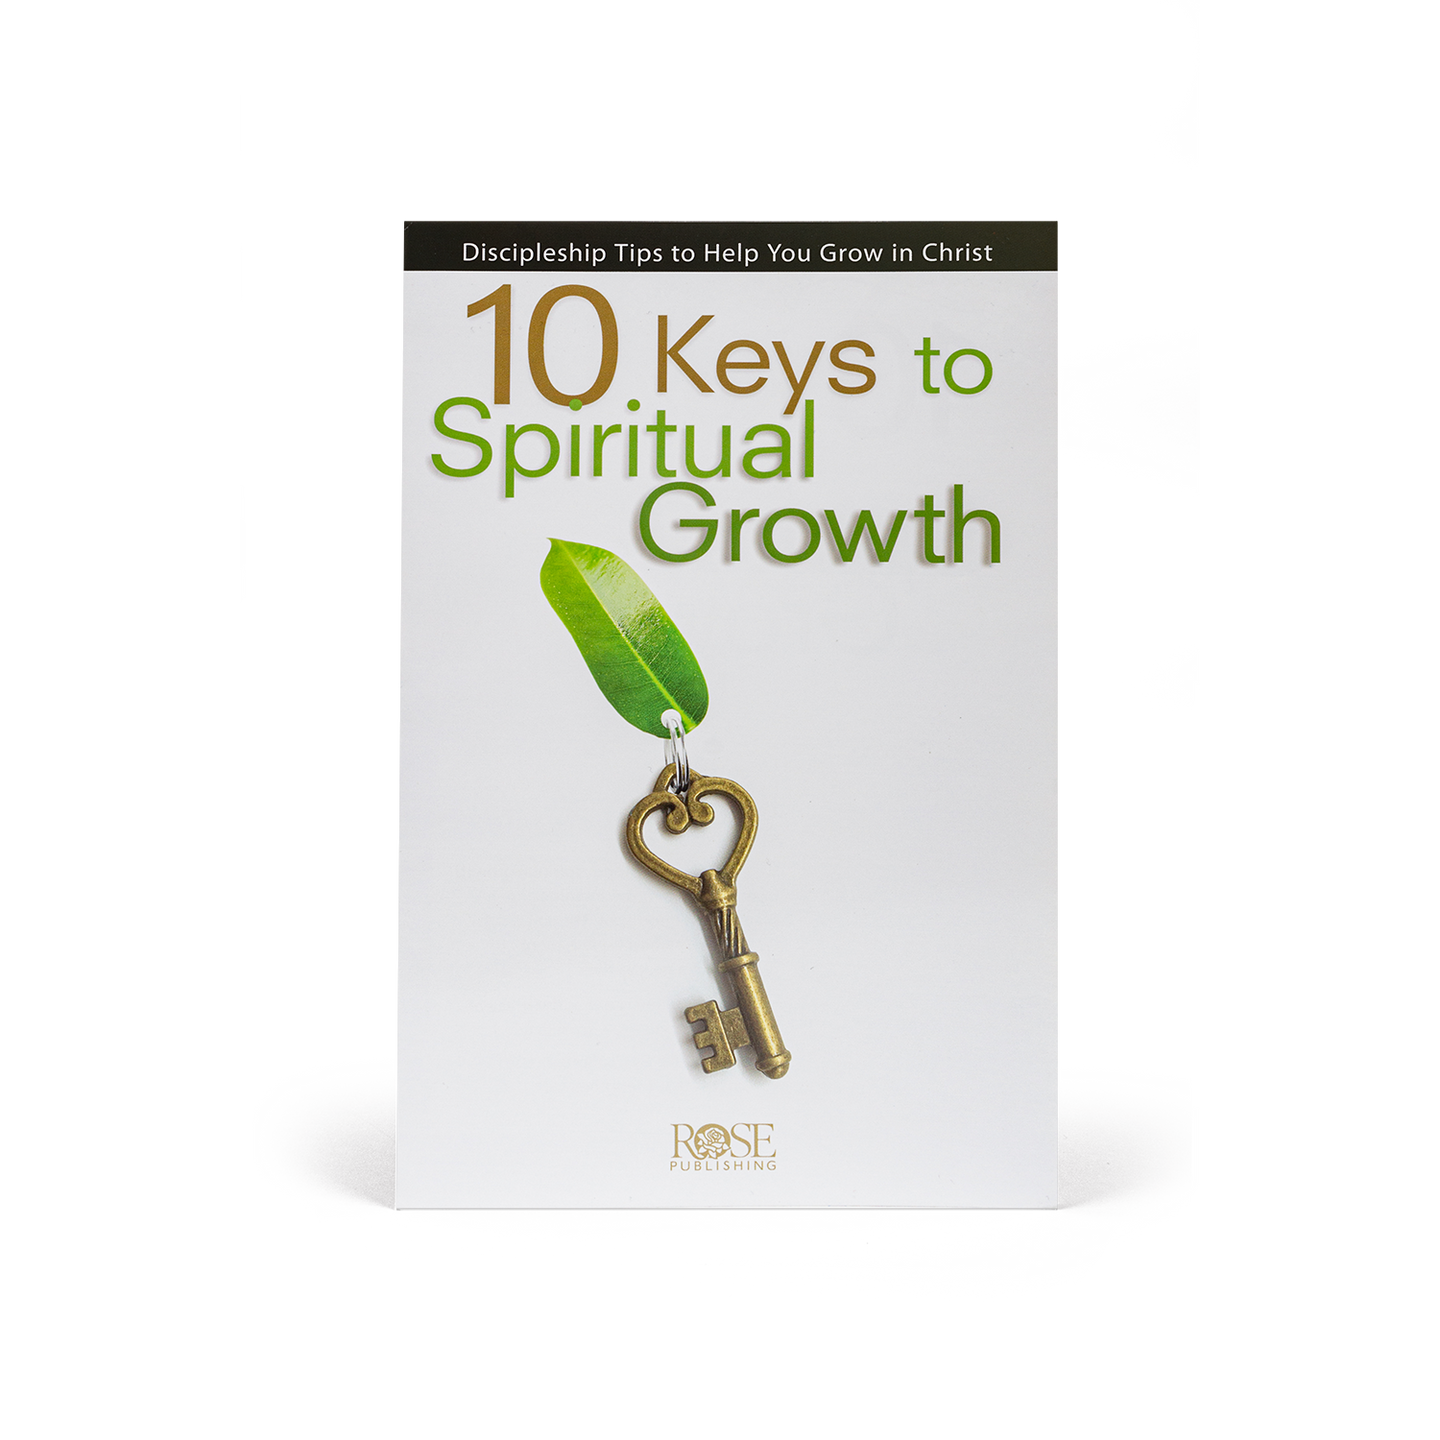 10 Keys to Spiritual Growth Reference Guide